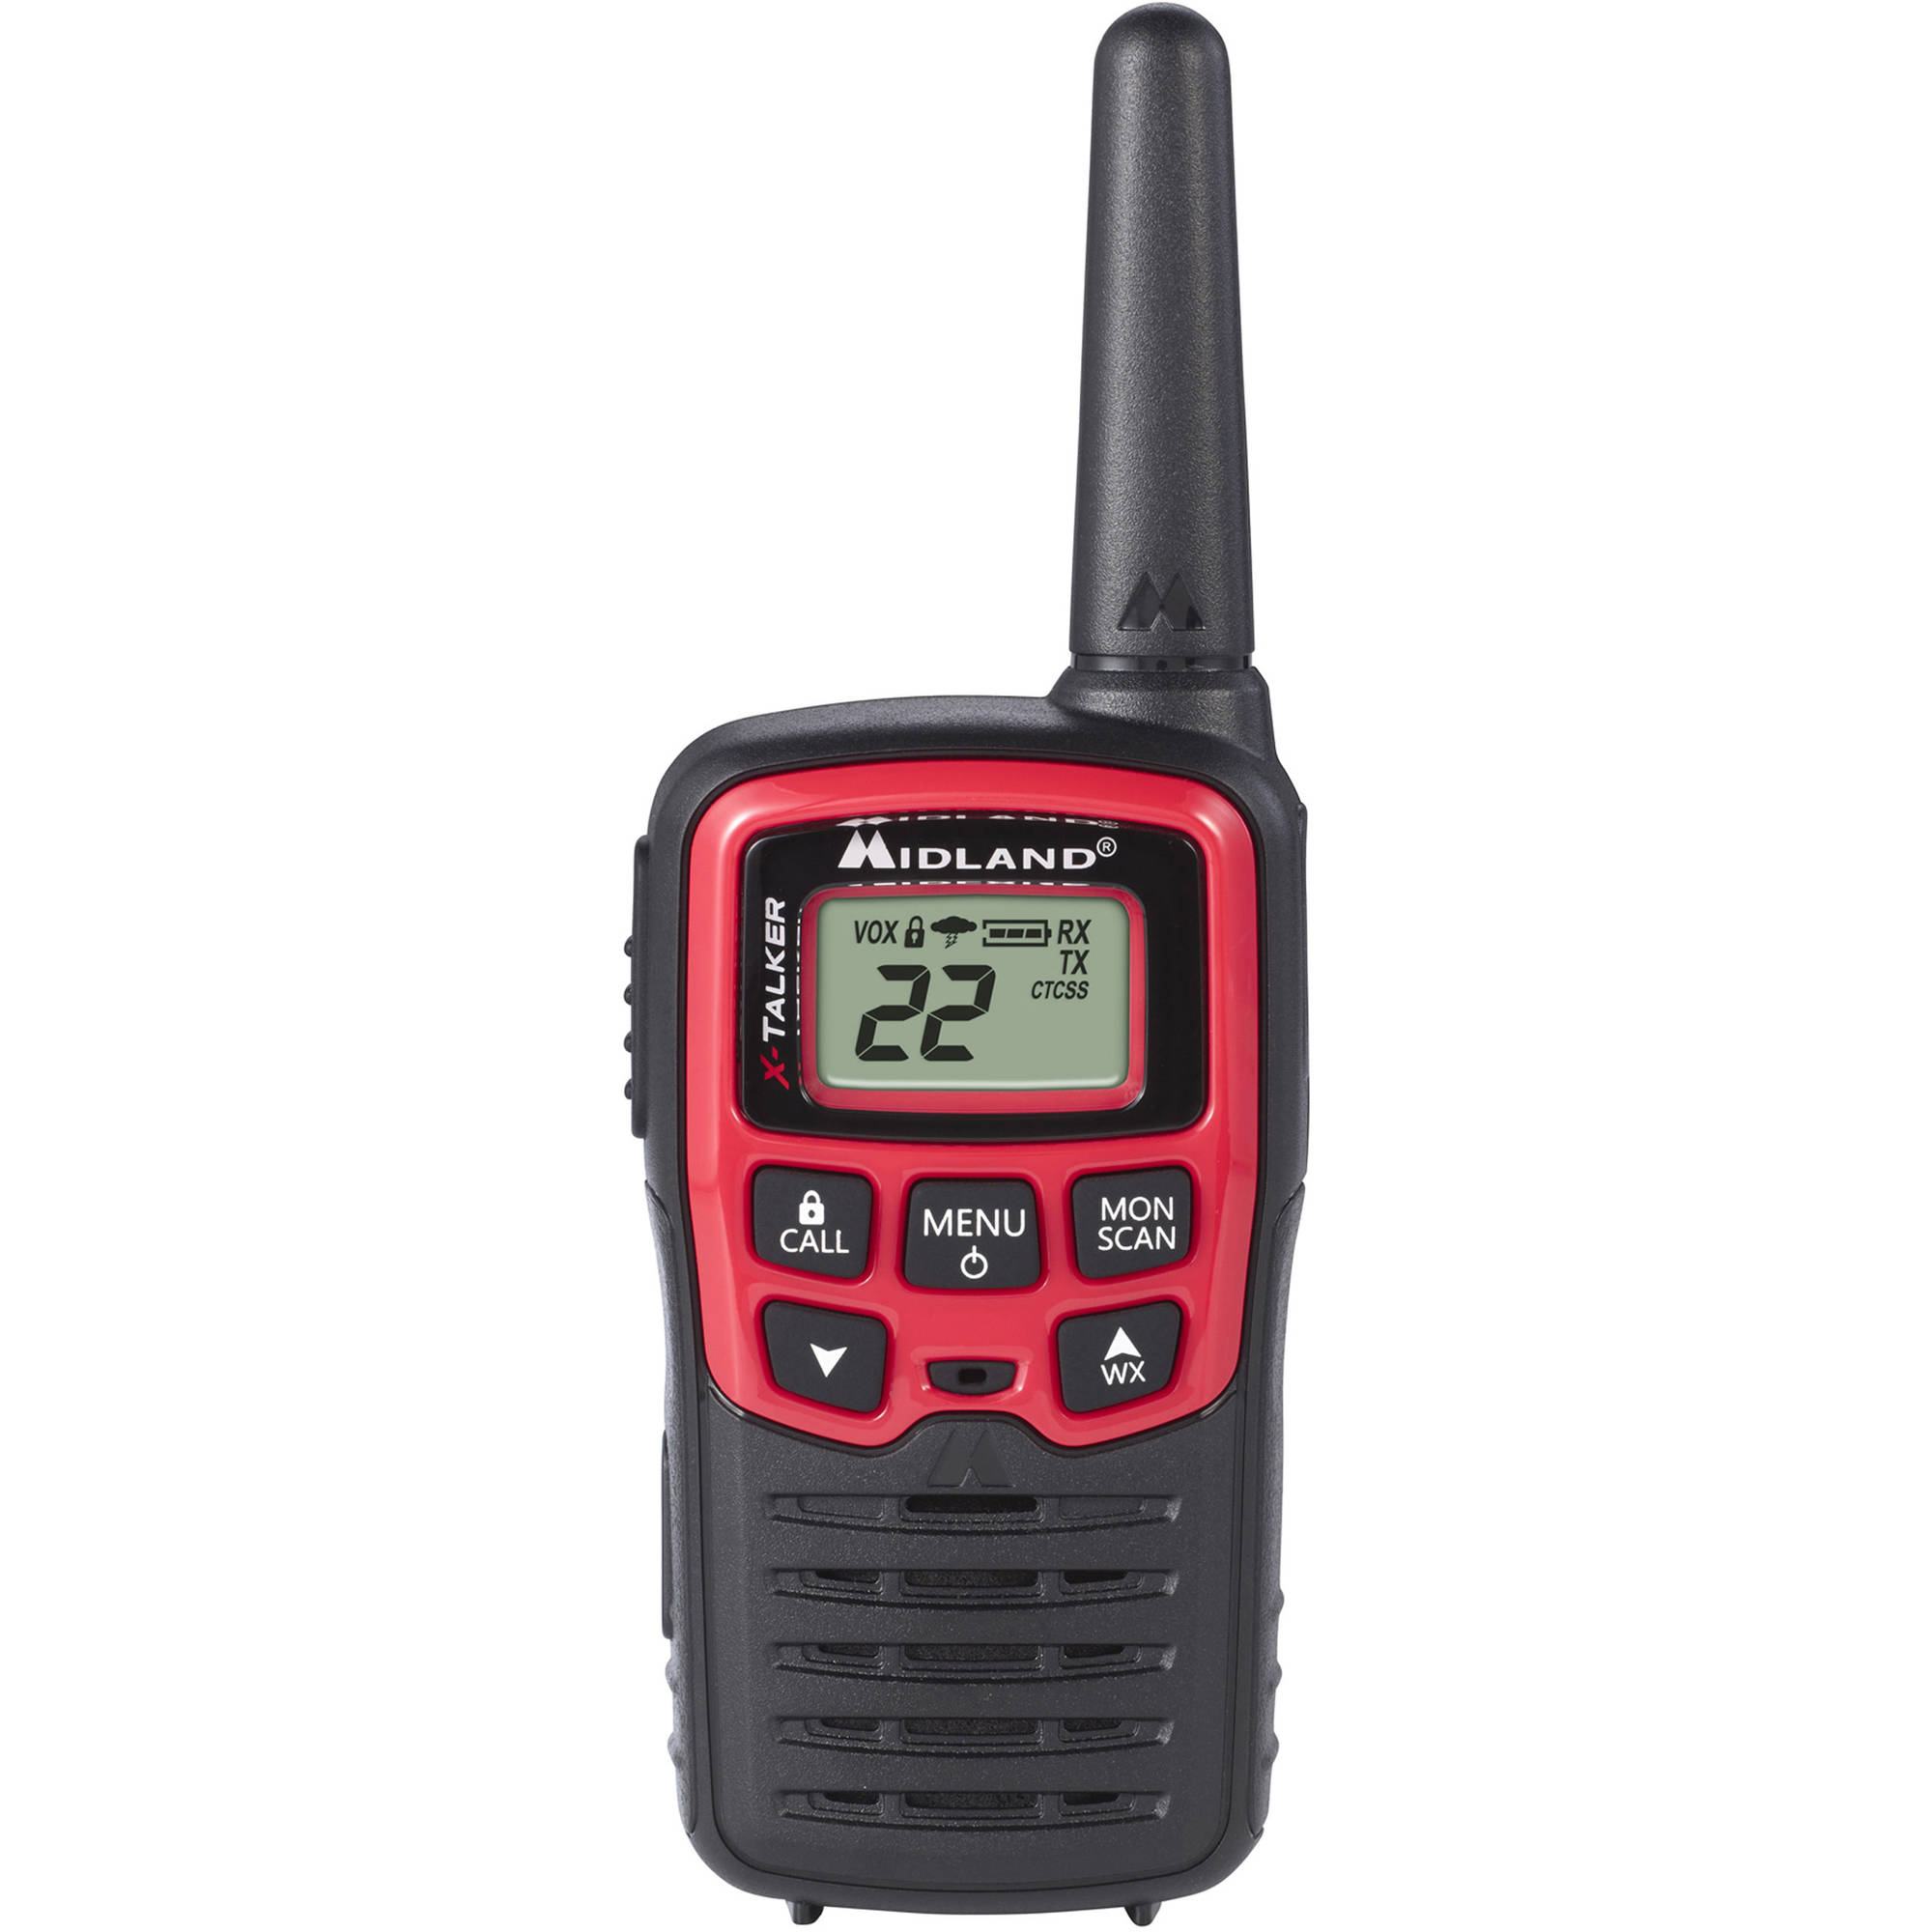 Midland T31VP Walkie Talkies Two-Way Radios 22 Channels (38 Privacy Codes),  Channel Scan, and our legendary Weather Alert technology